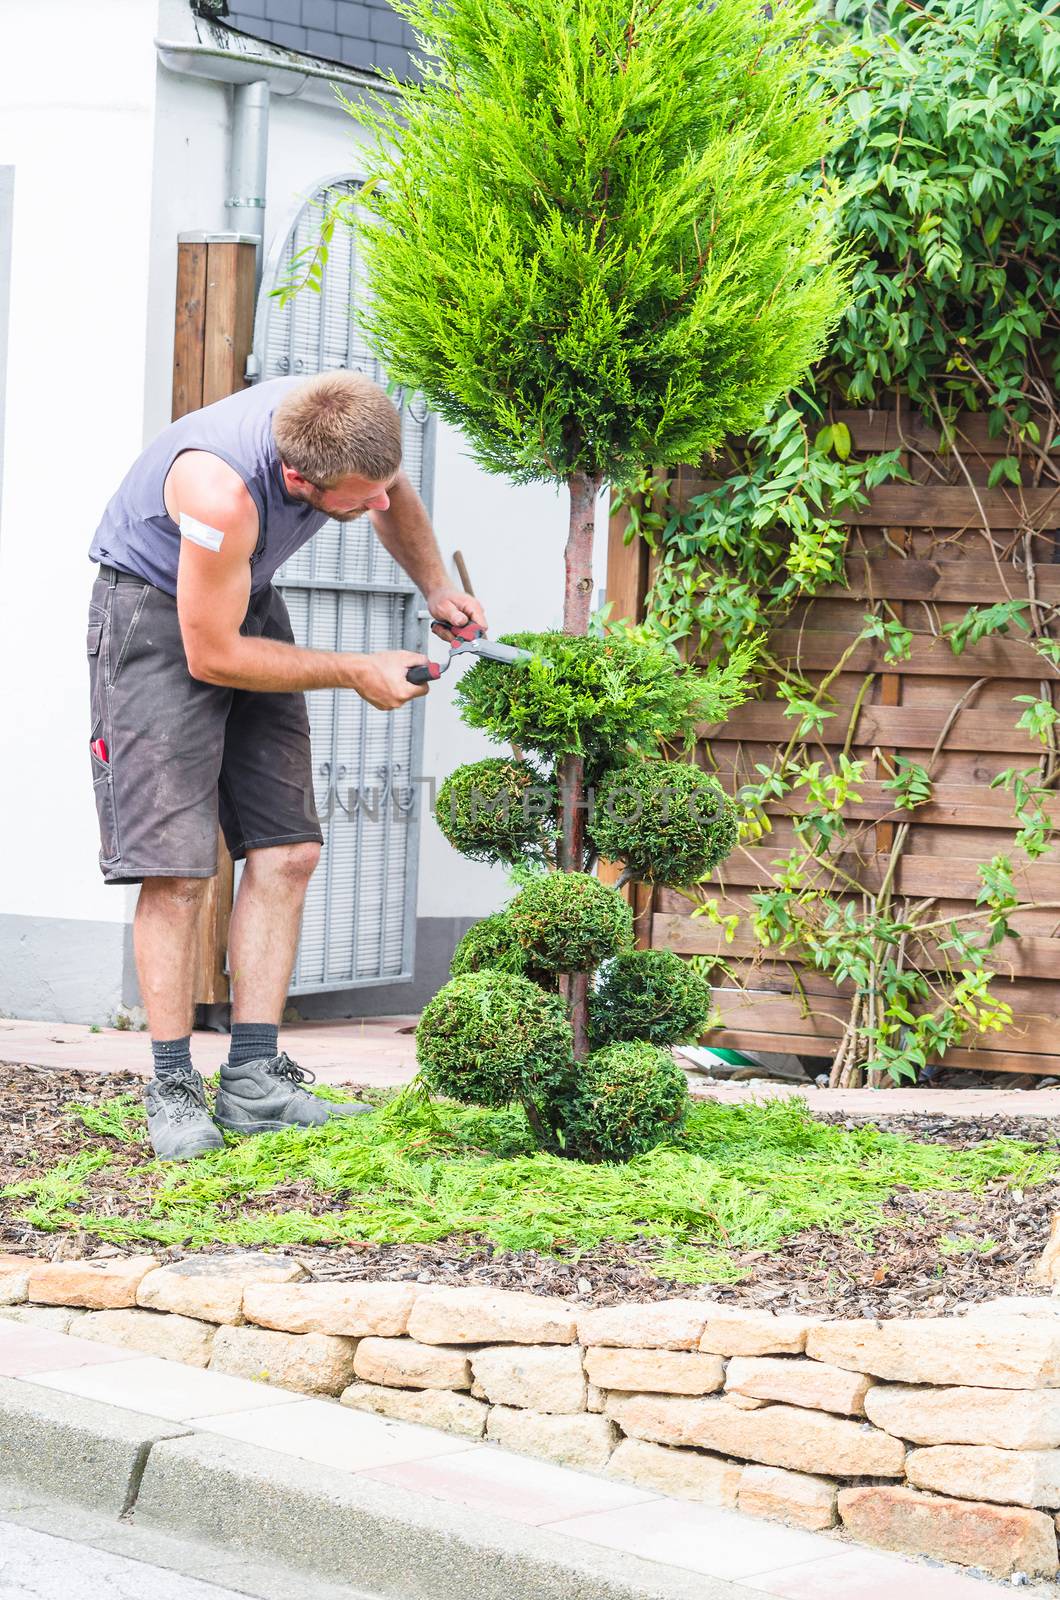 Gardener when cropping, cutting a boxwood, arborvitae with scissors